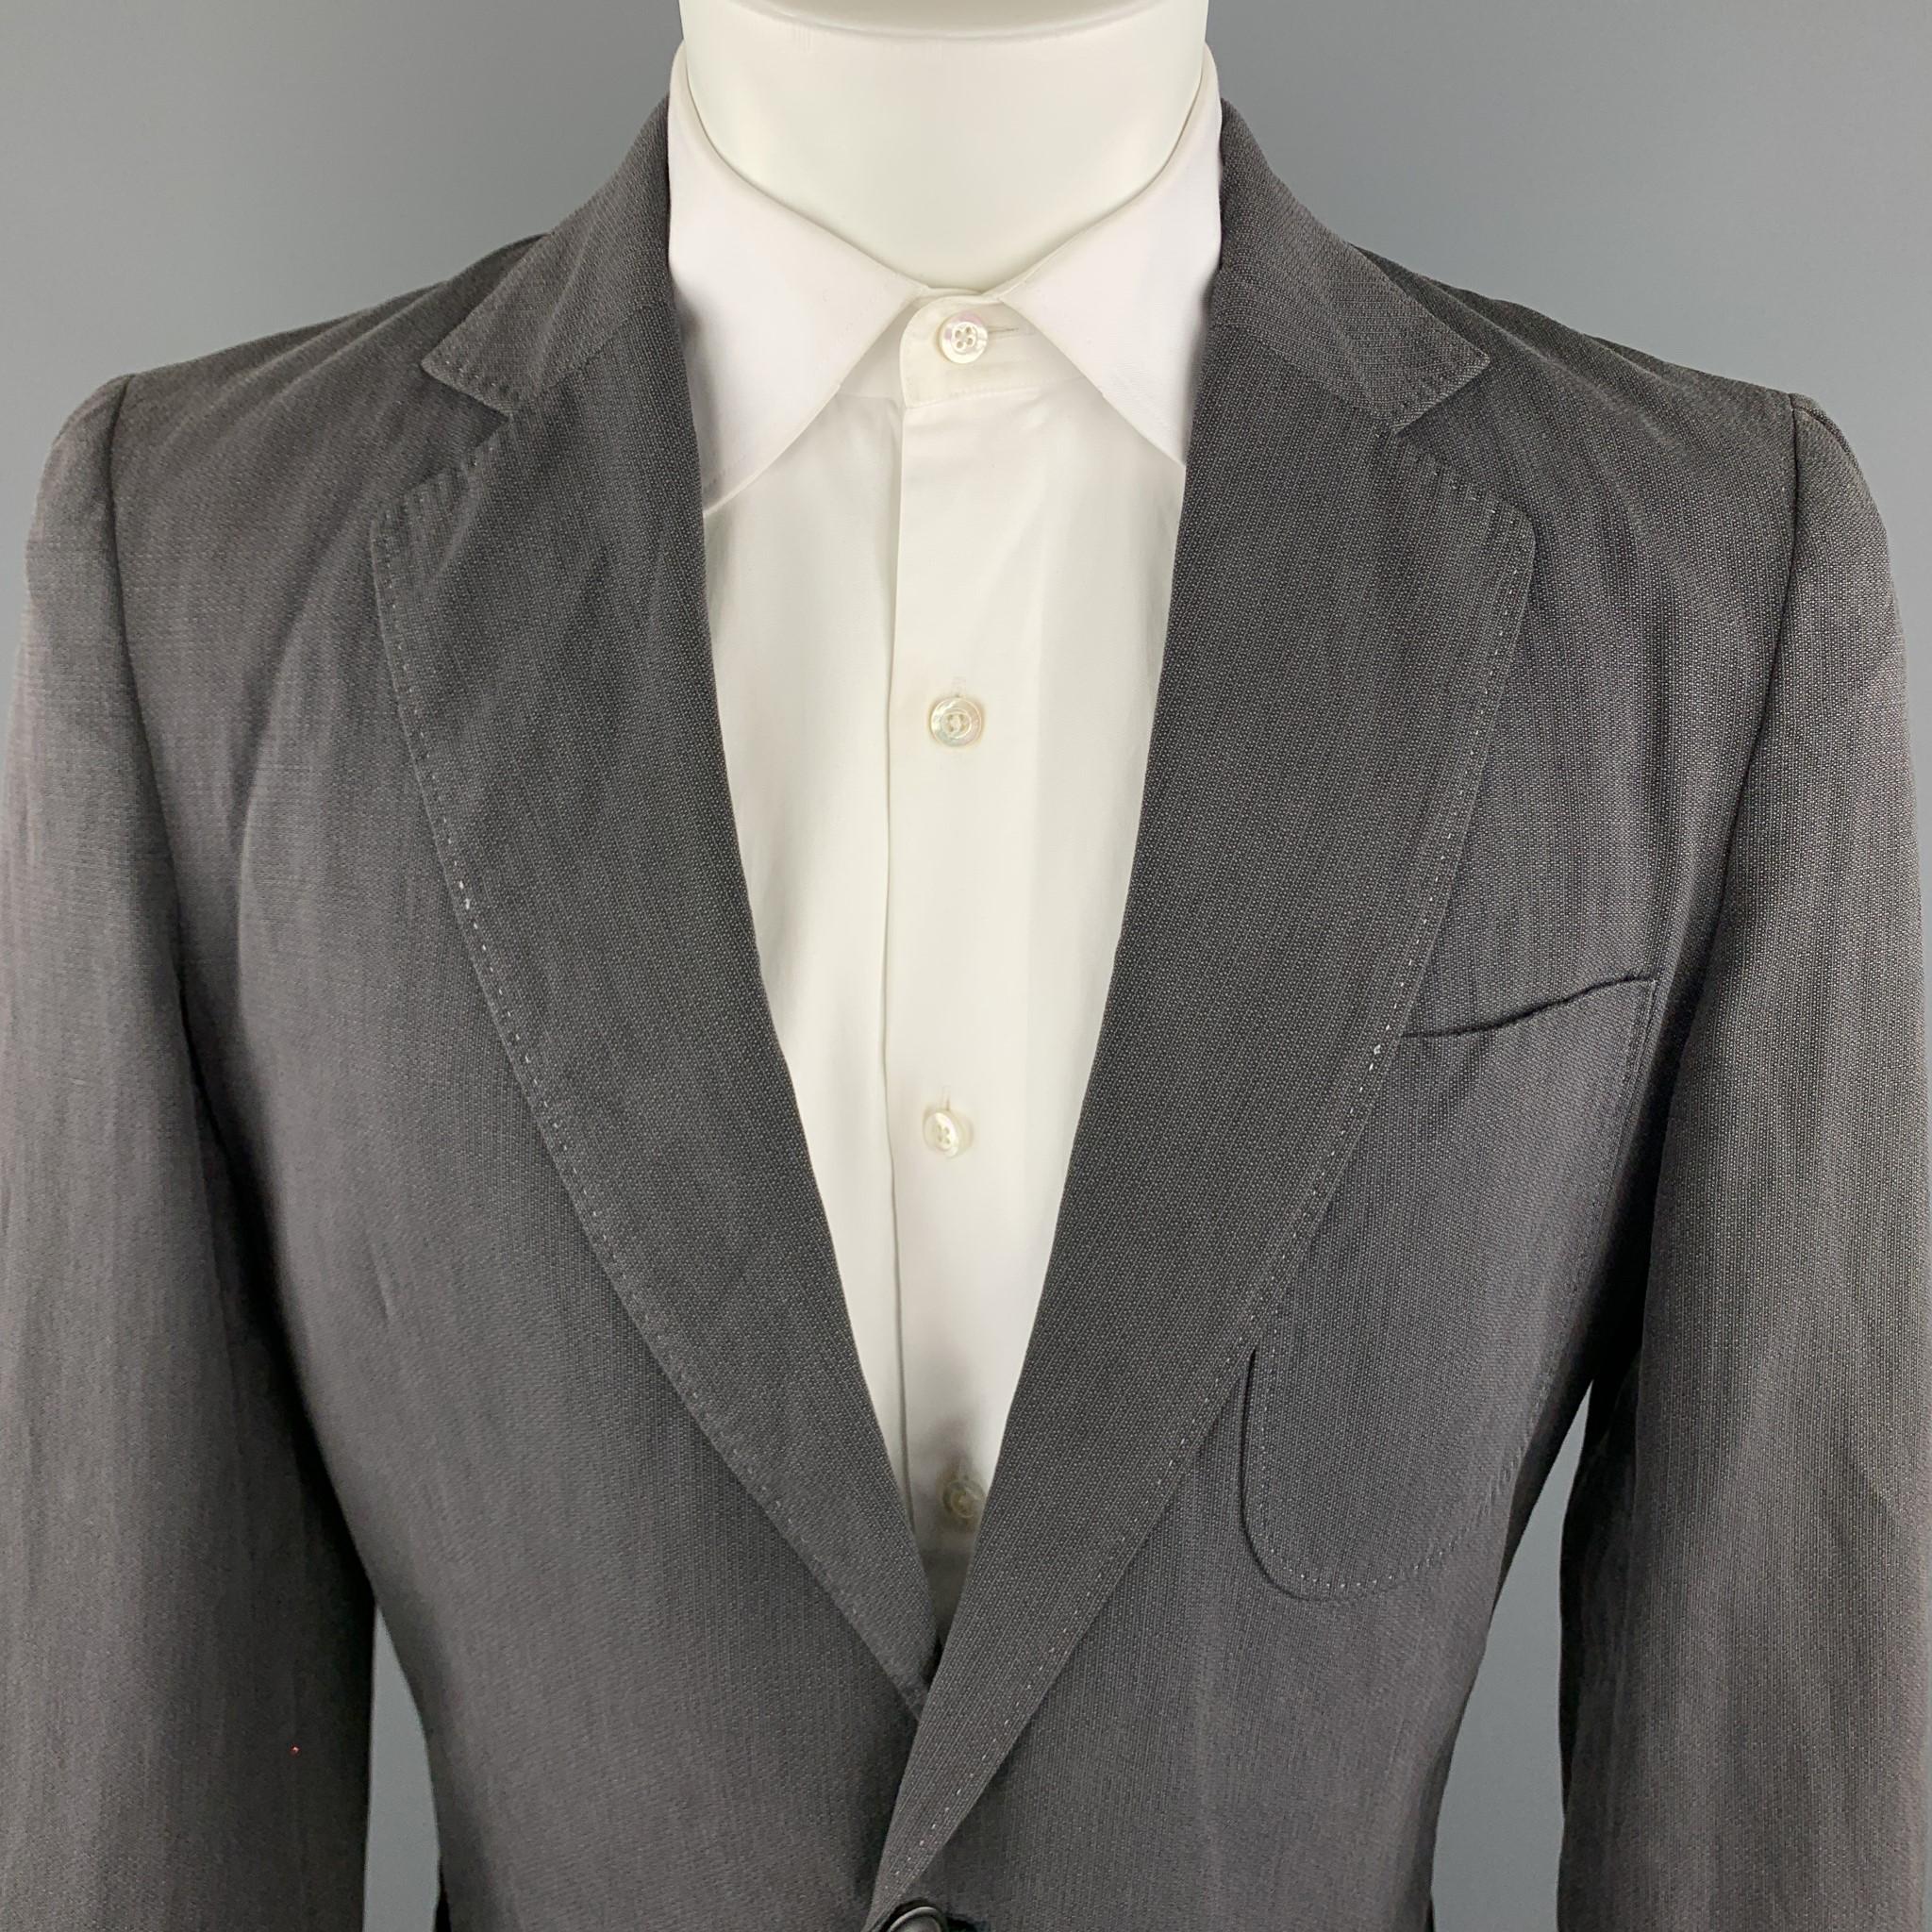 MAISON MARGIELA Sport Coat comes in a dark grey linen / cotton material, with a notch lapel, patch pockets, two buttons at closure, single breasted, functional buttons at cuffs, a double vent at back, unlined. As is. Made in Italy.

Very Good